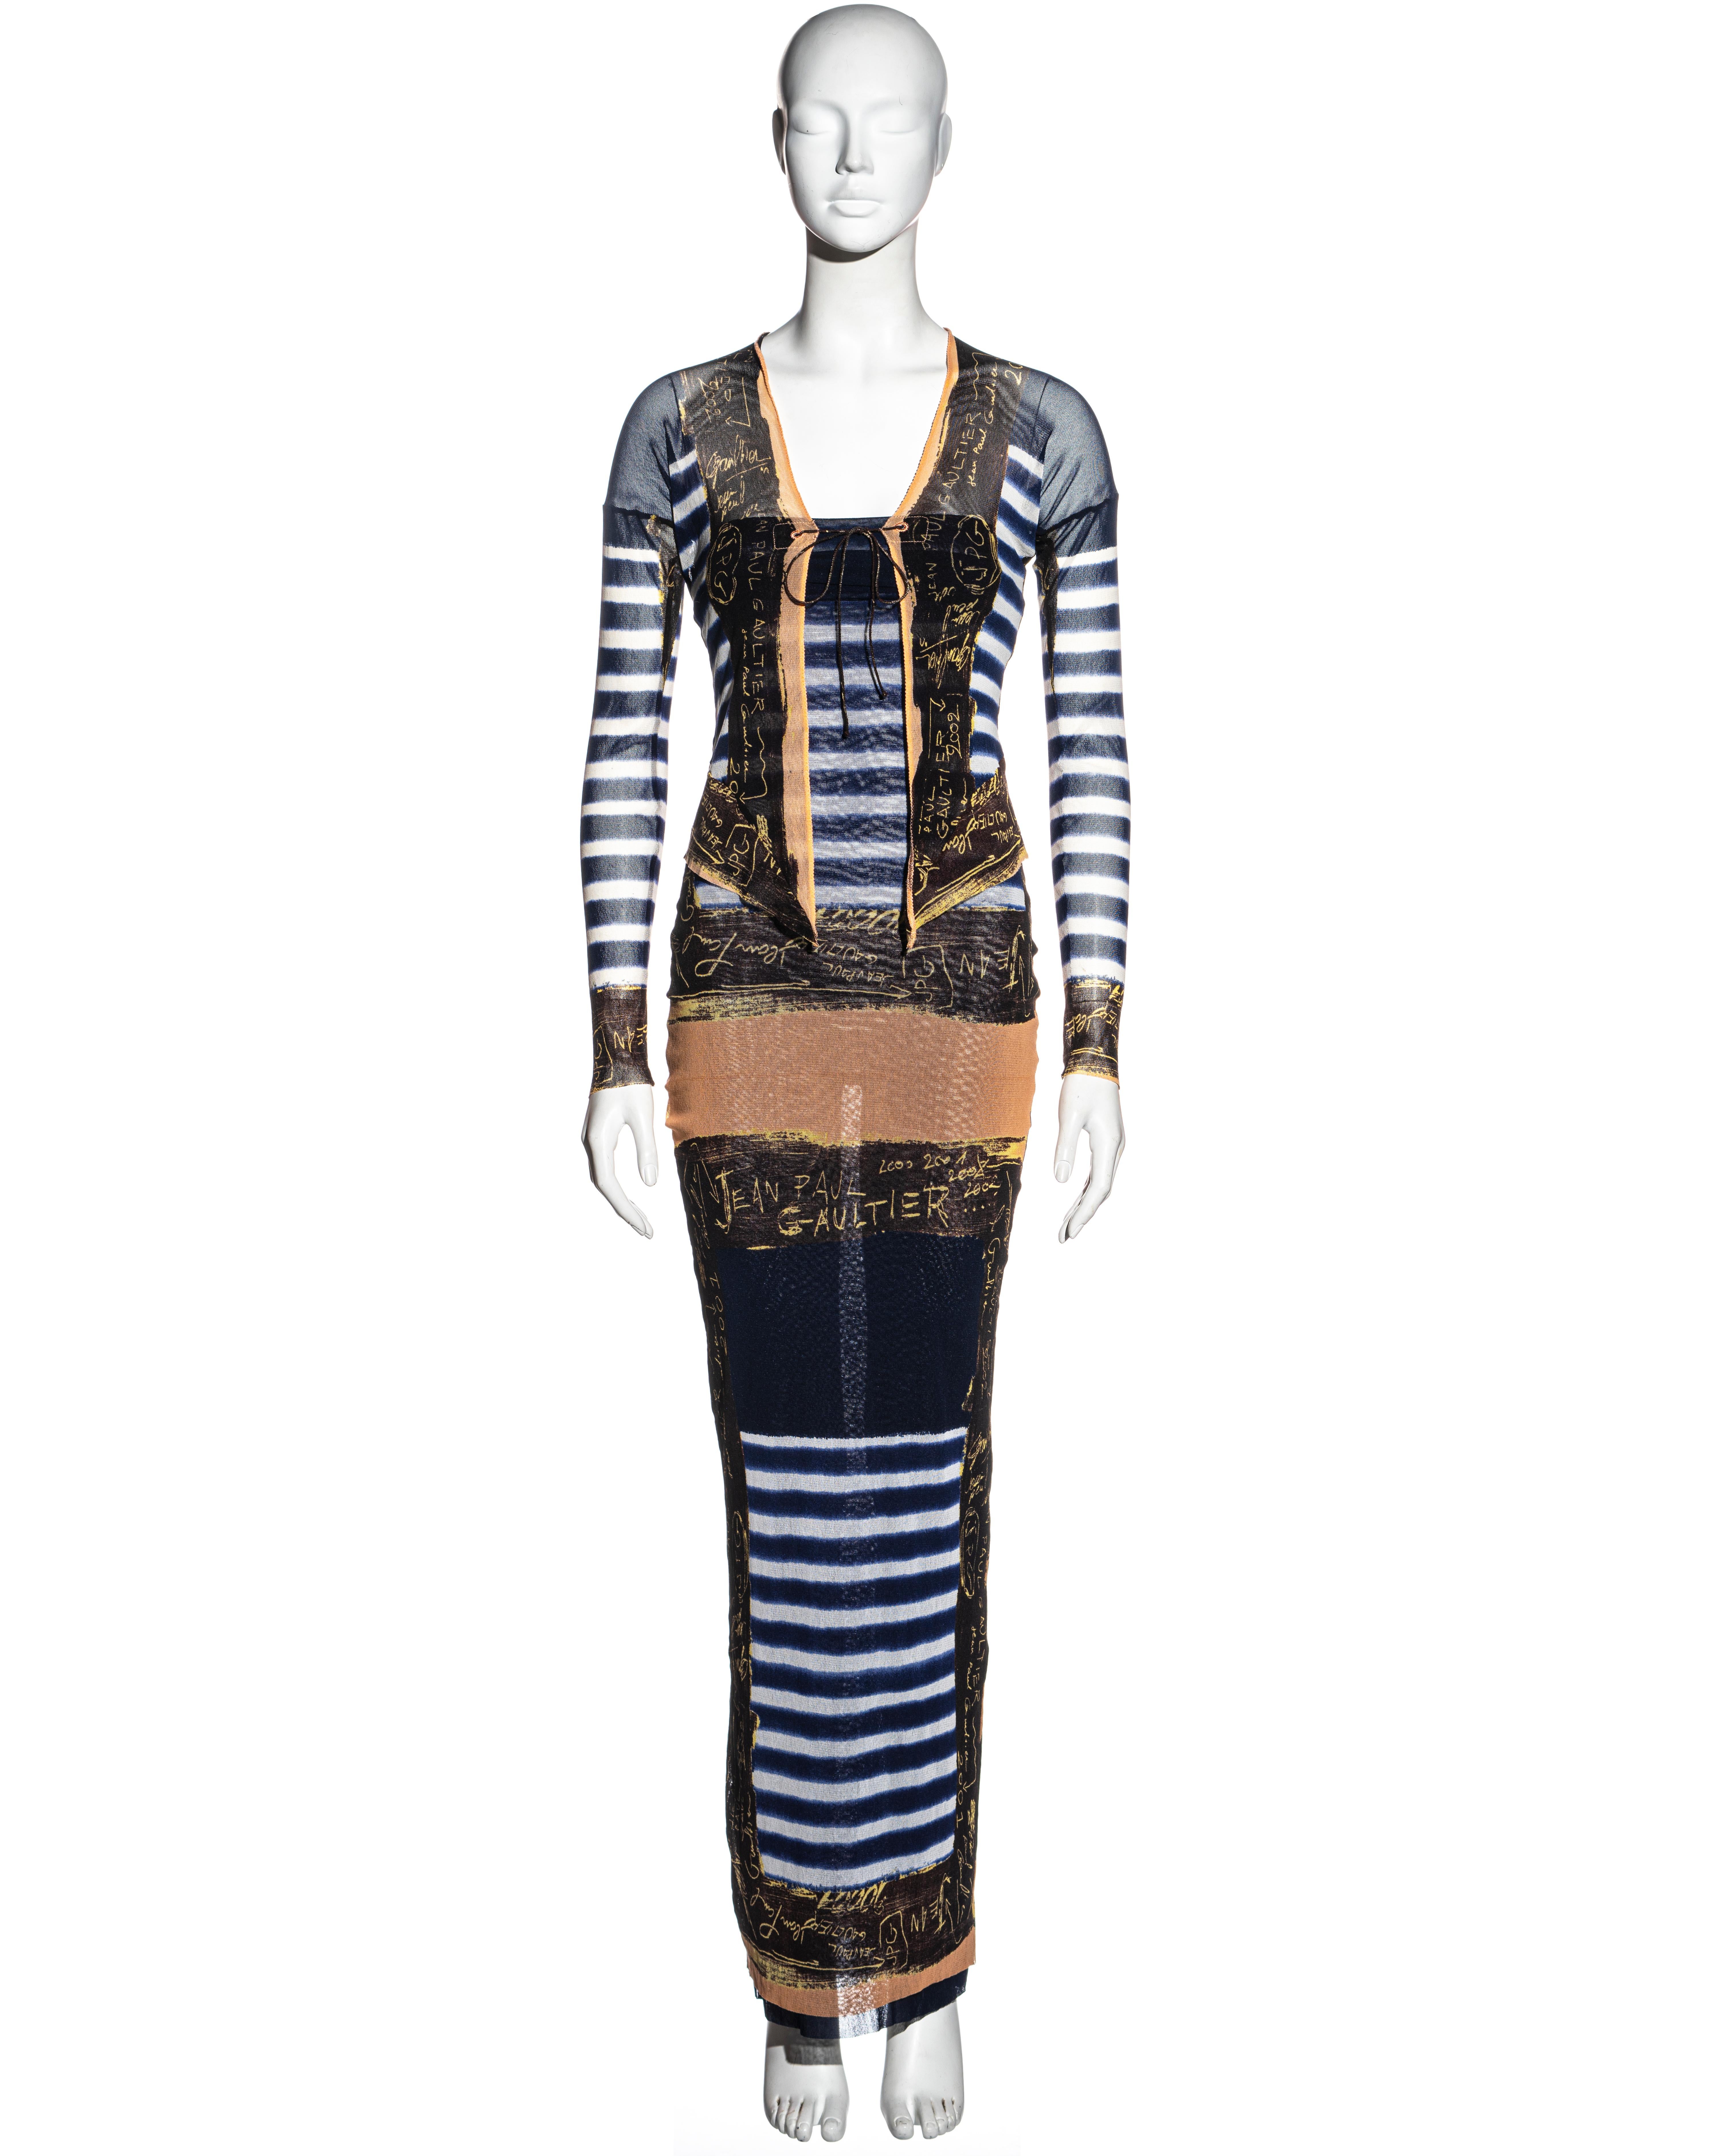 ▪ Jean Paul Gaultier tube dress and cardigan set
▪ Sold by One of a Kind Archive
▪ Nylon mesh with navy blue and white stripes and a graffiti print border 
▪ Fitted cardigan with open front and string ties 
▪ Maxi tube dress which can also be styled